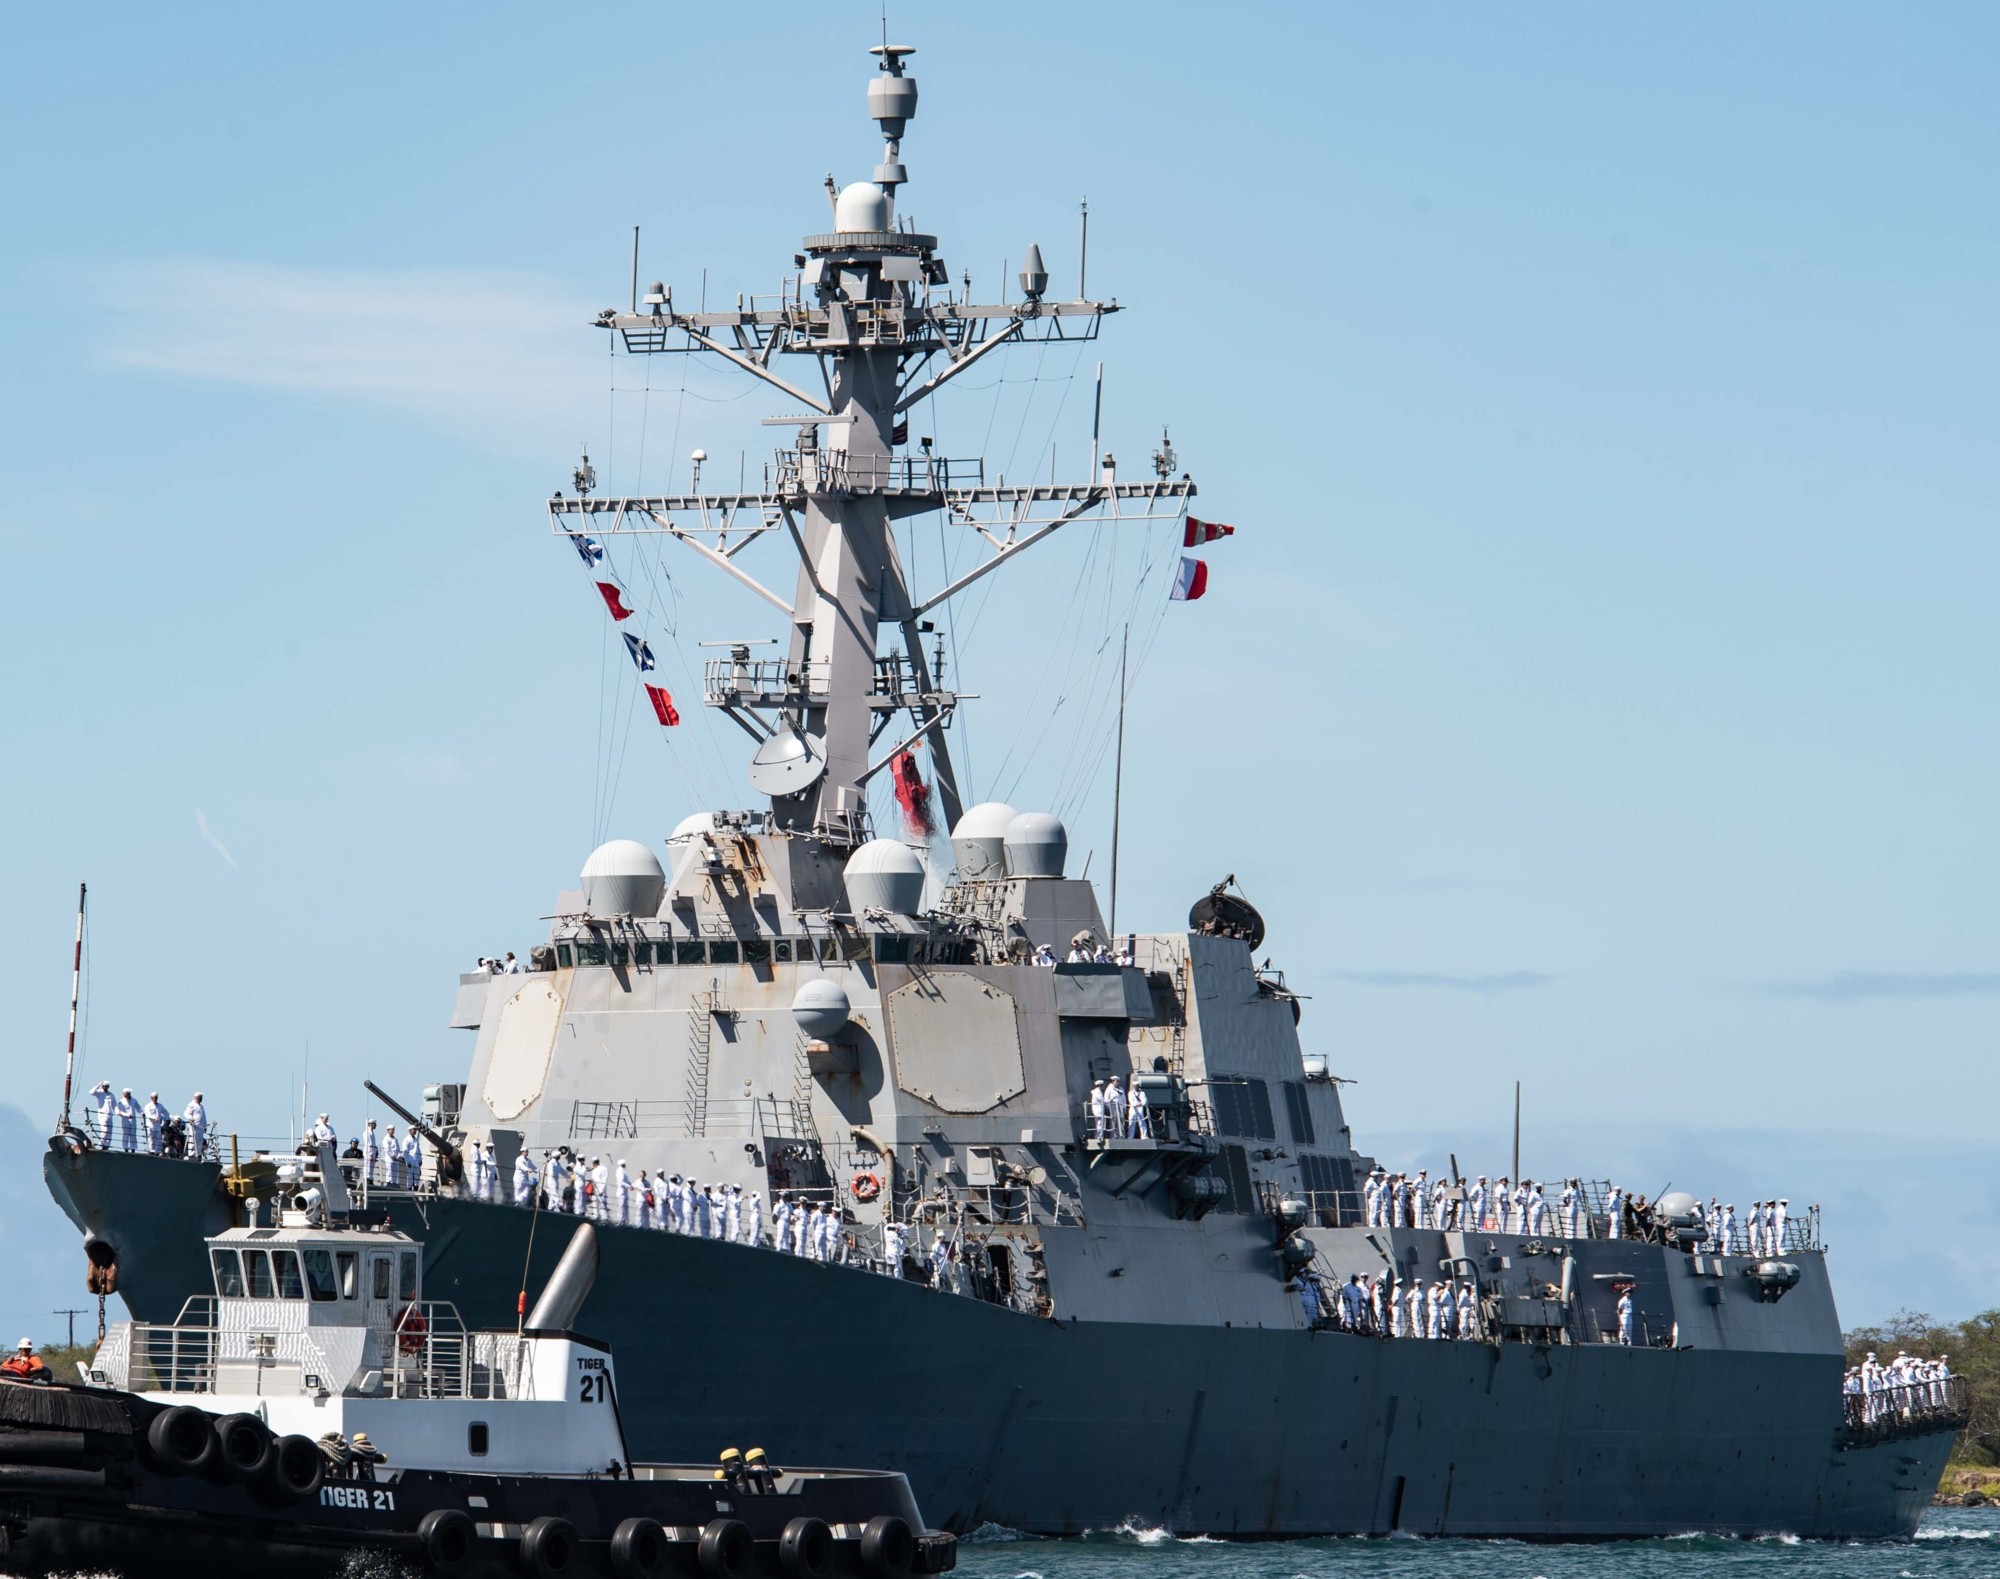 ddg-101 uss gridley arleigh burke class guided missile destroyer aegis us navy joint base pearl harbor hickam hawaii 80